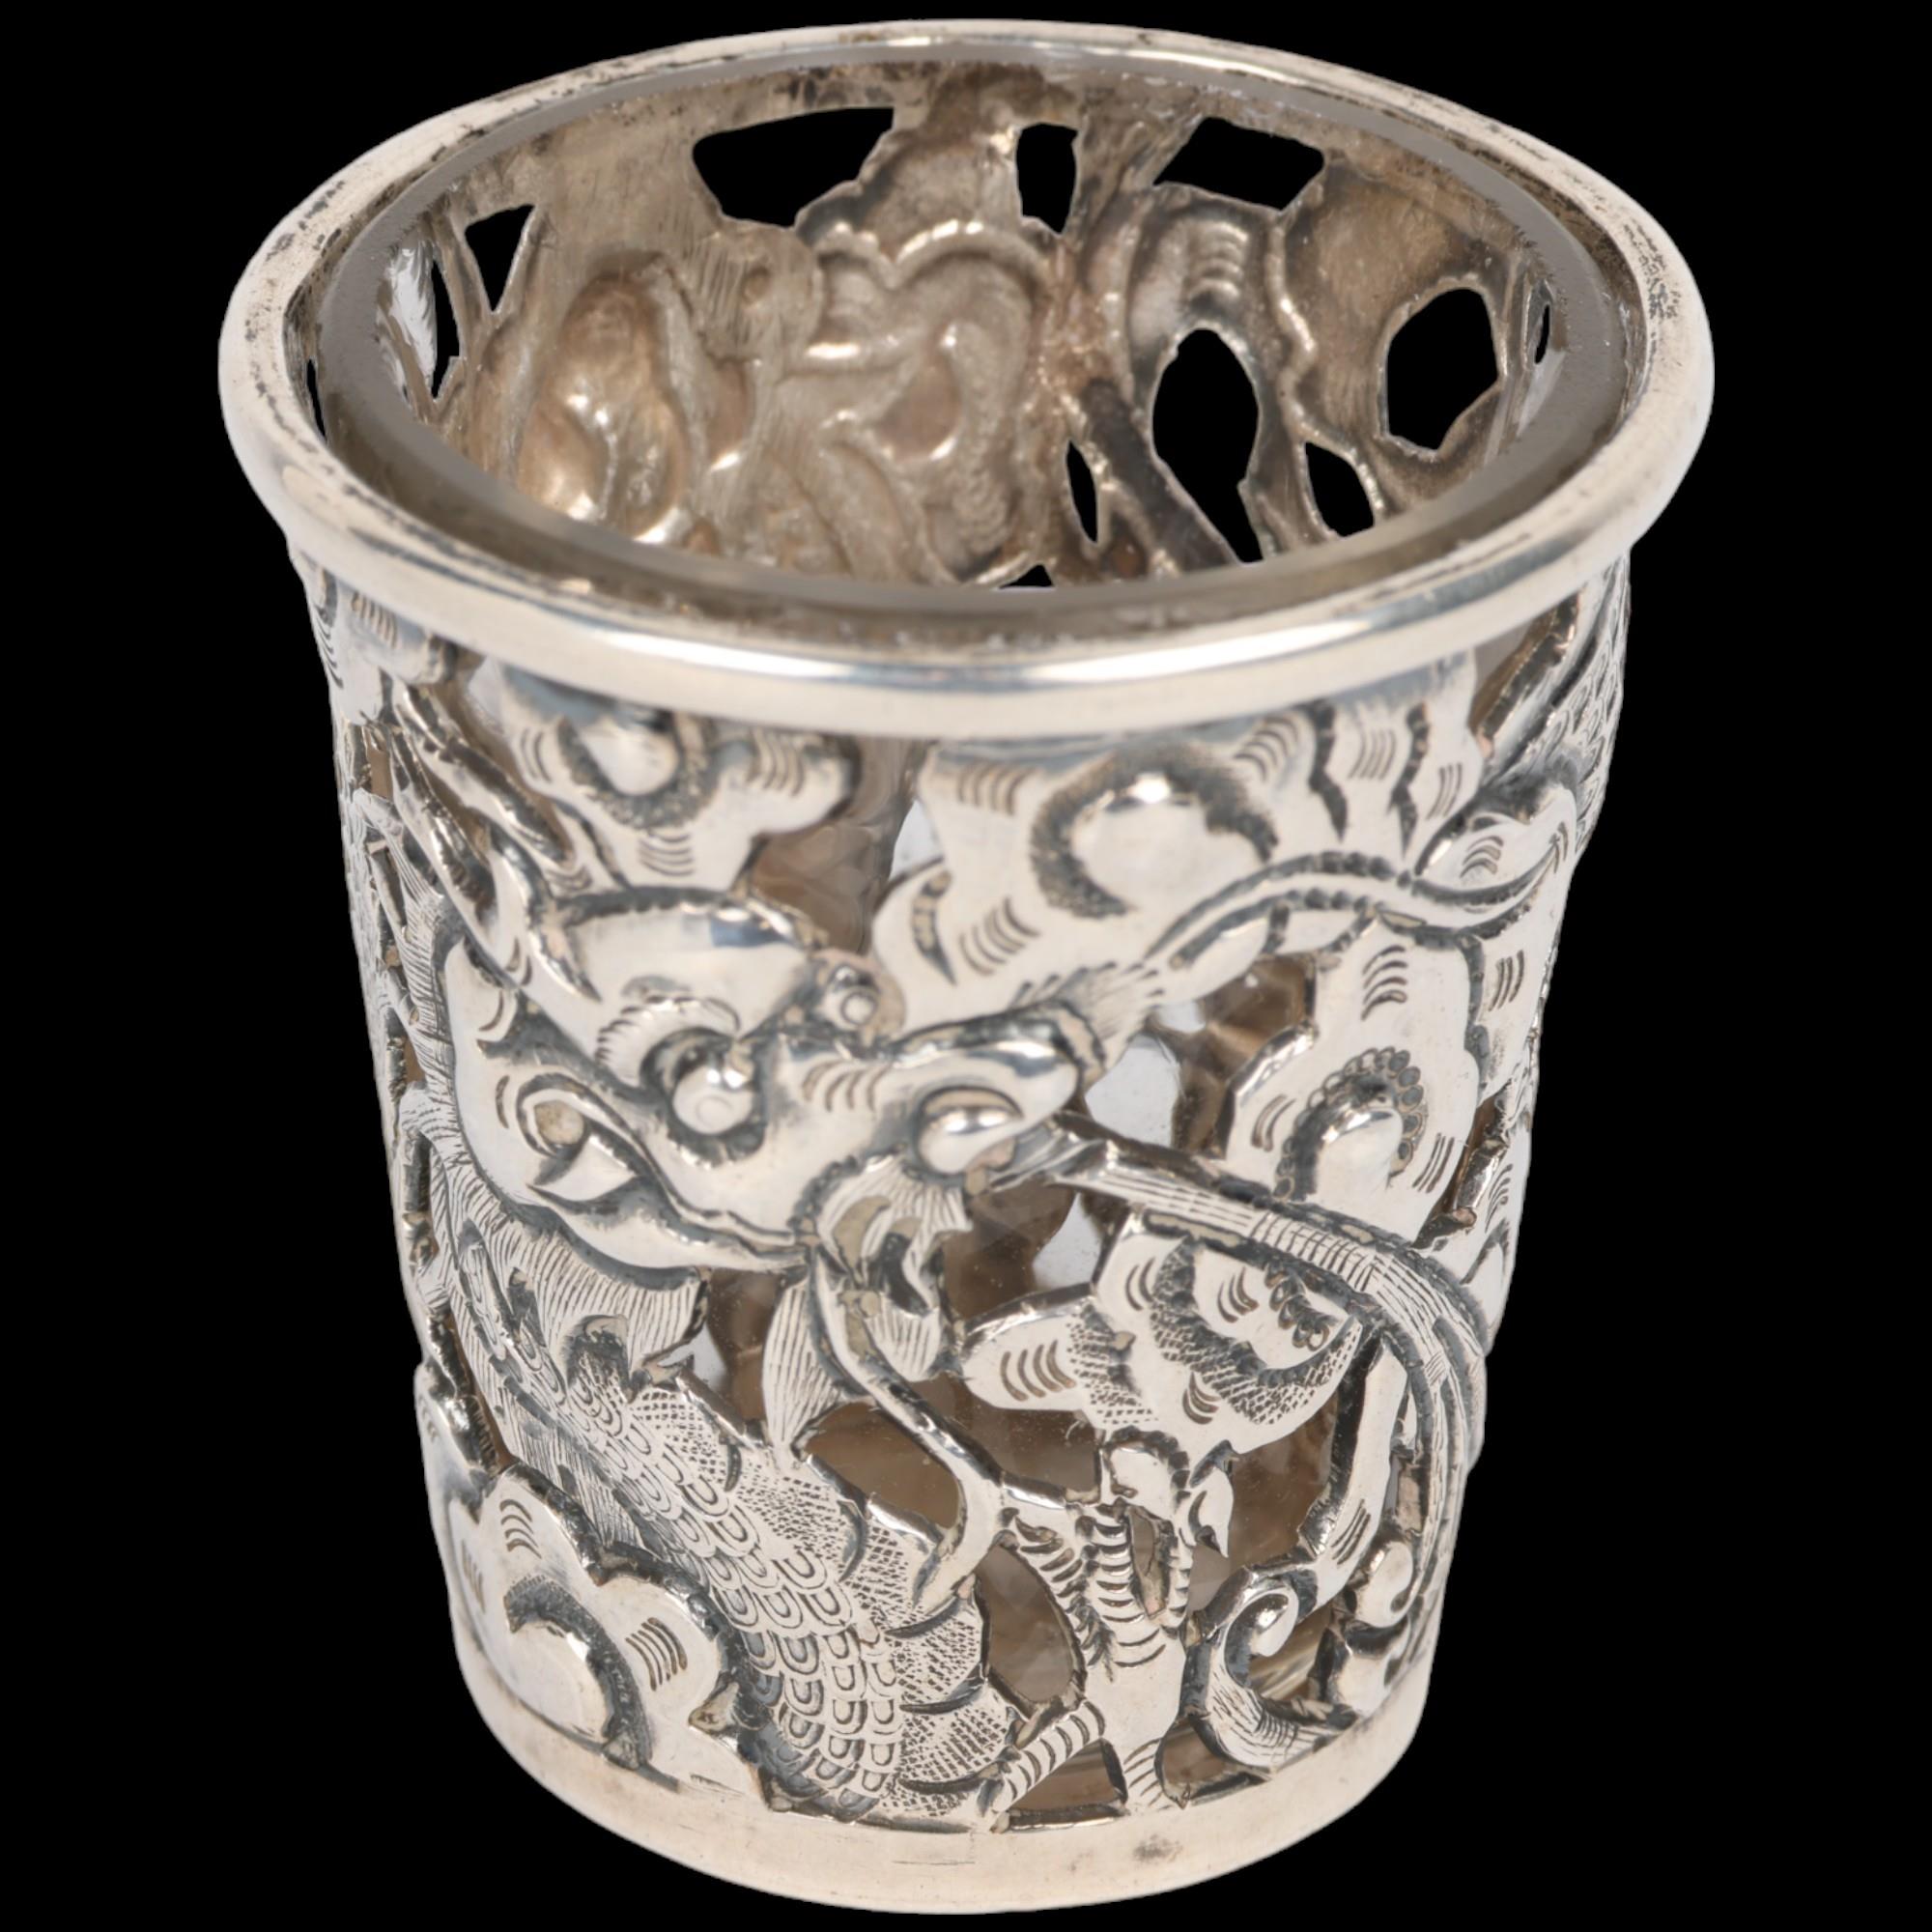 A Chinese export silver 'Dragon' drinking tot, circa 1900, signed with Artisan mark, retailed by